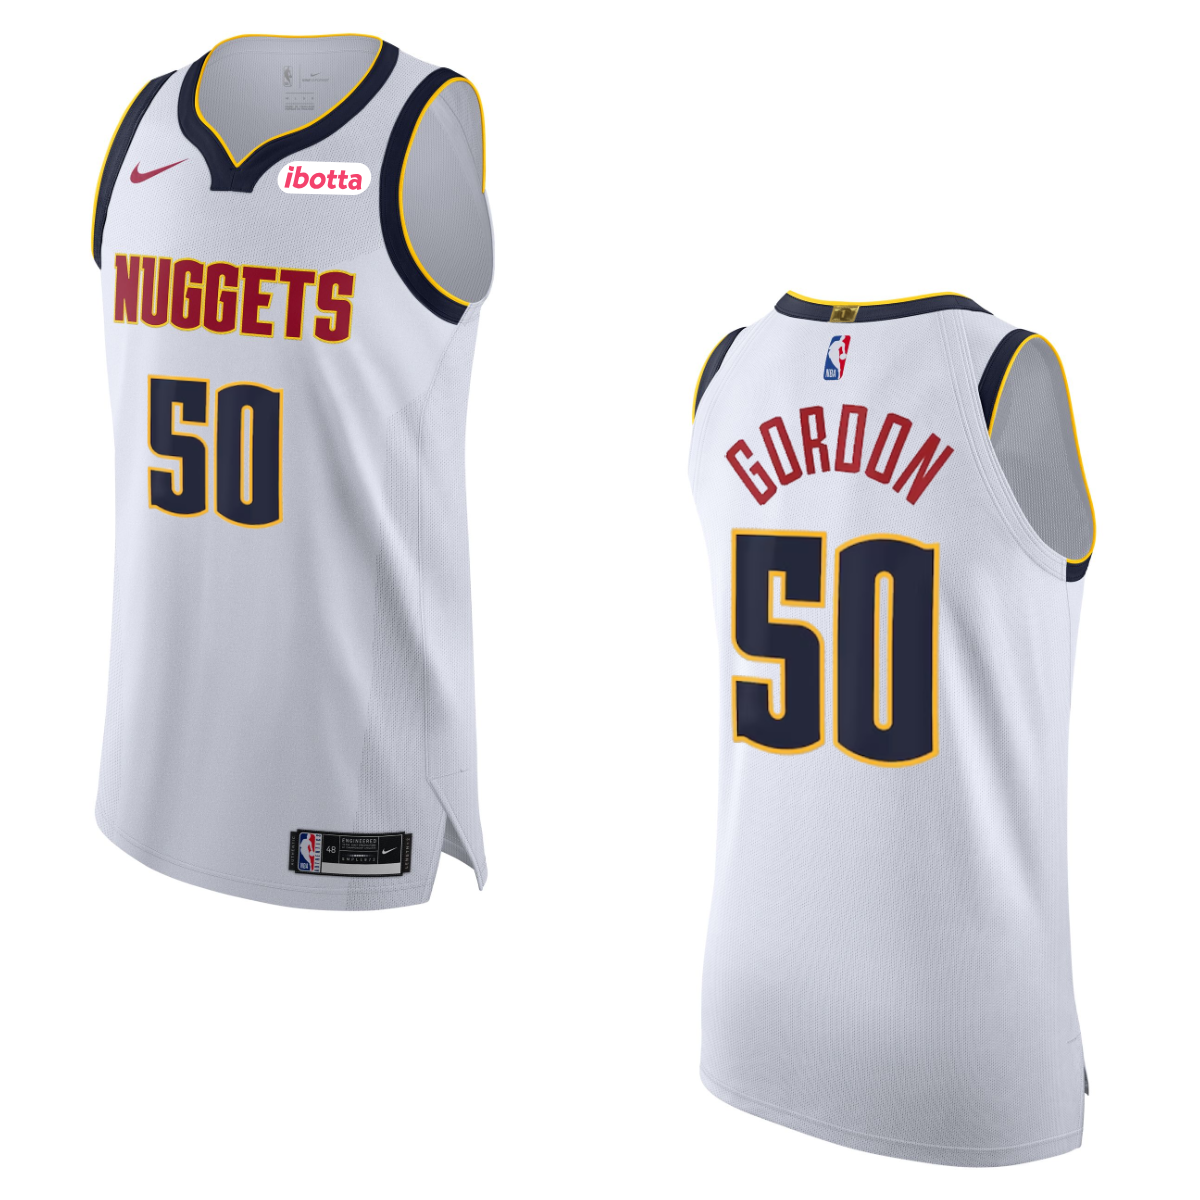 Nuggets Association Authentic Jersey